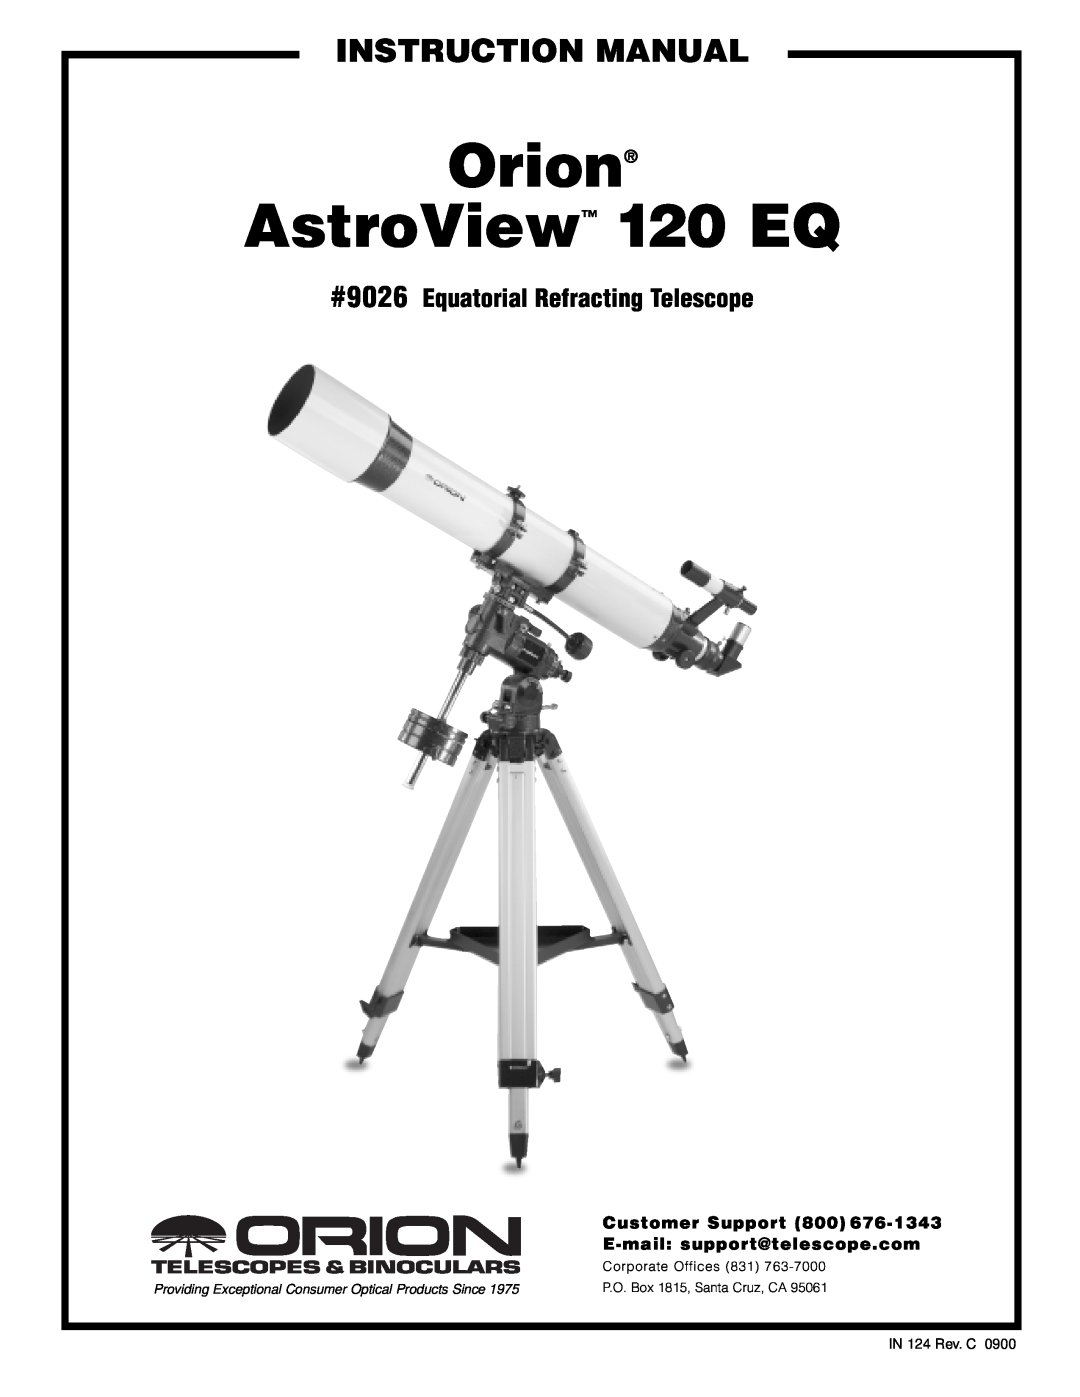 Orion instruction manual Orion, AstroView 120 EQ, #9026 Equatorial Refracting Telescope, Customer Support 